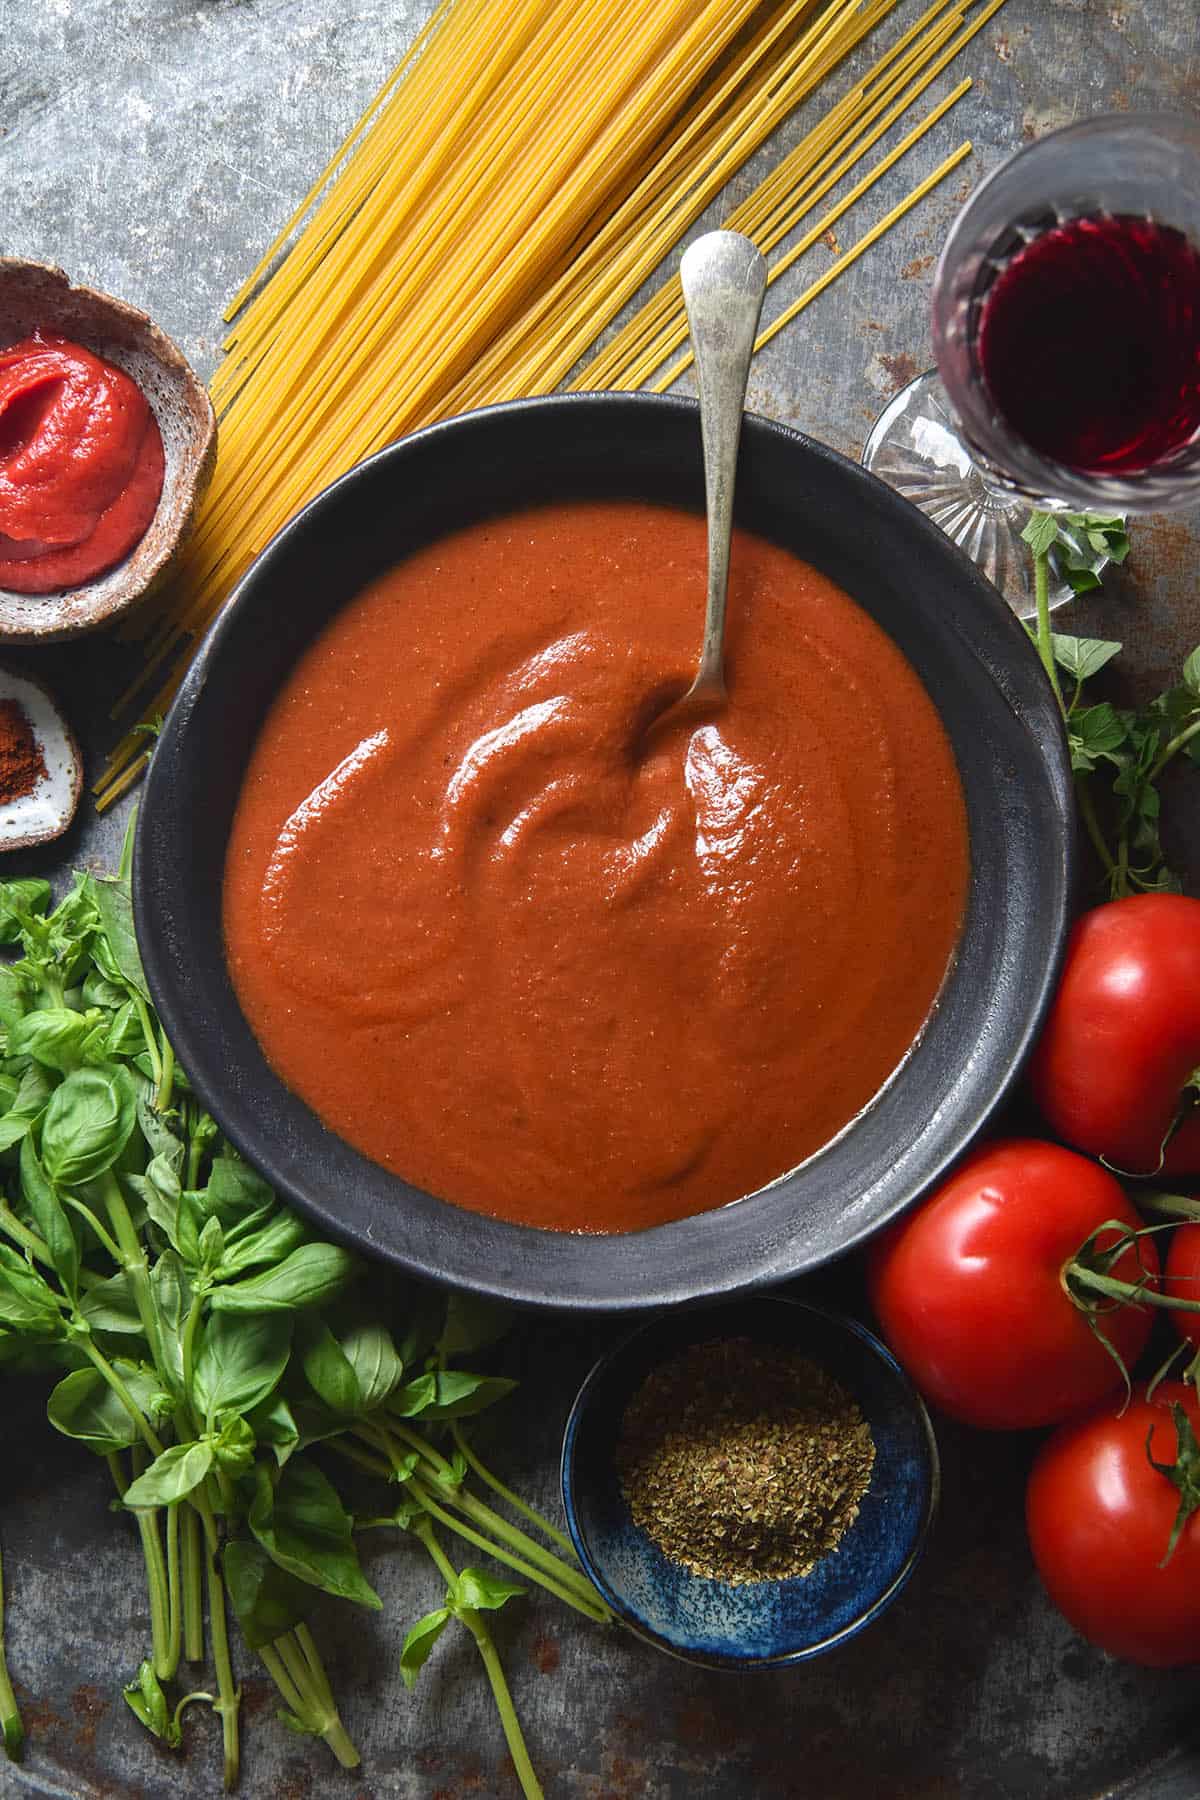 An aerial view of a dark navy ceramic bowl filled with low FODMAP pasta sauce. The bowl is surrounded by ingredients for pasta, casually arranged. Tomatoes, oregano, red wine, spaghetti, tomato paste, basil and dried oregano are all casually arranged around the central bowl.